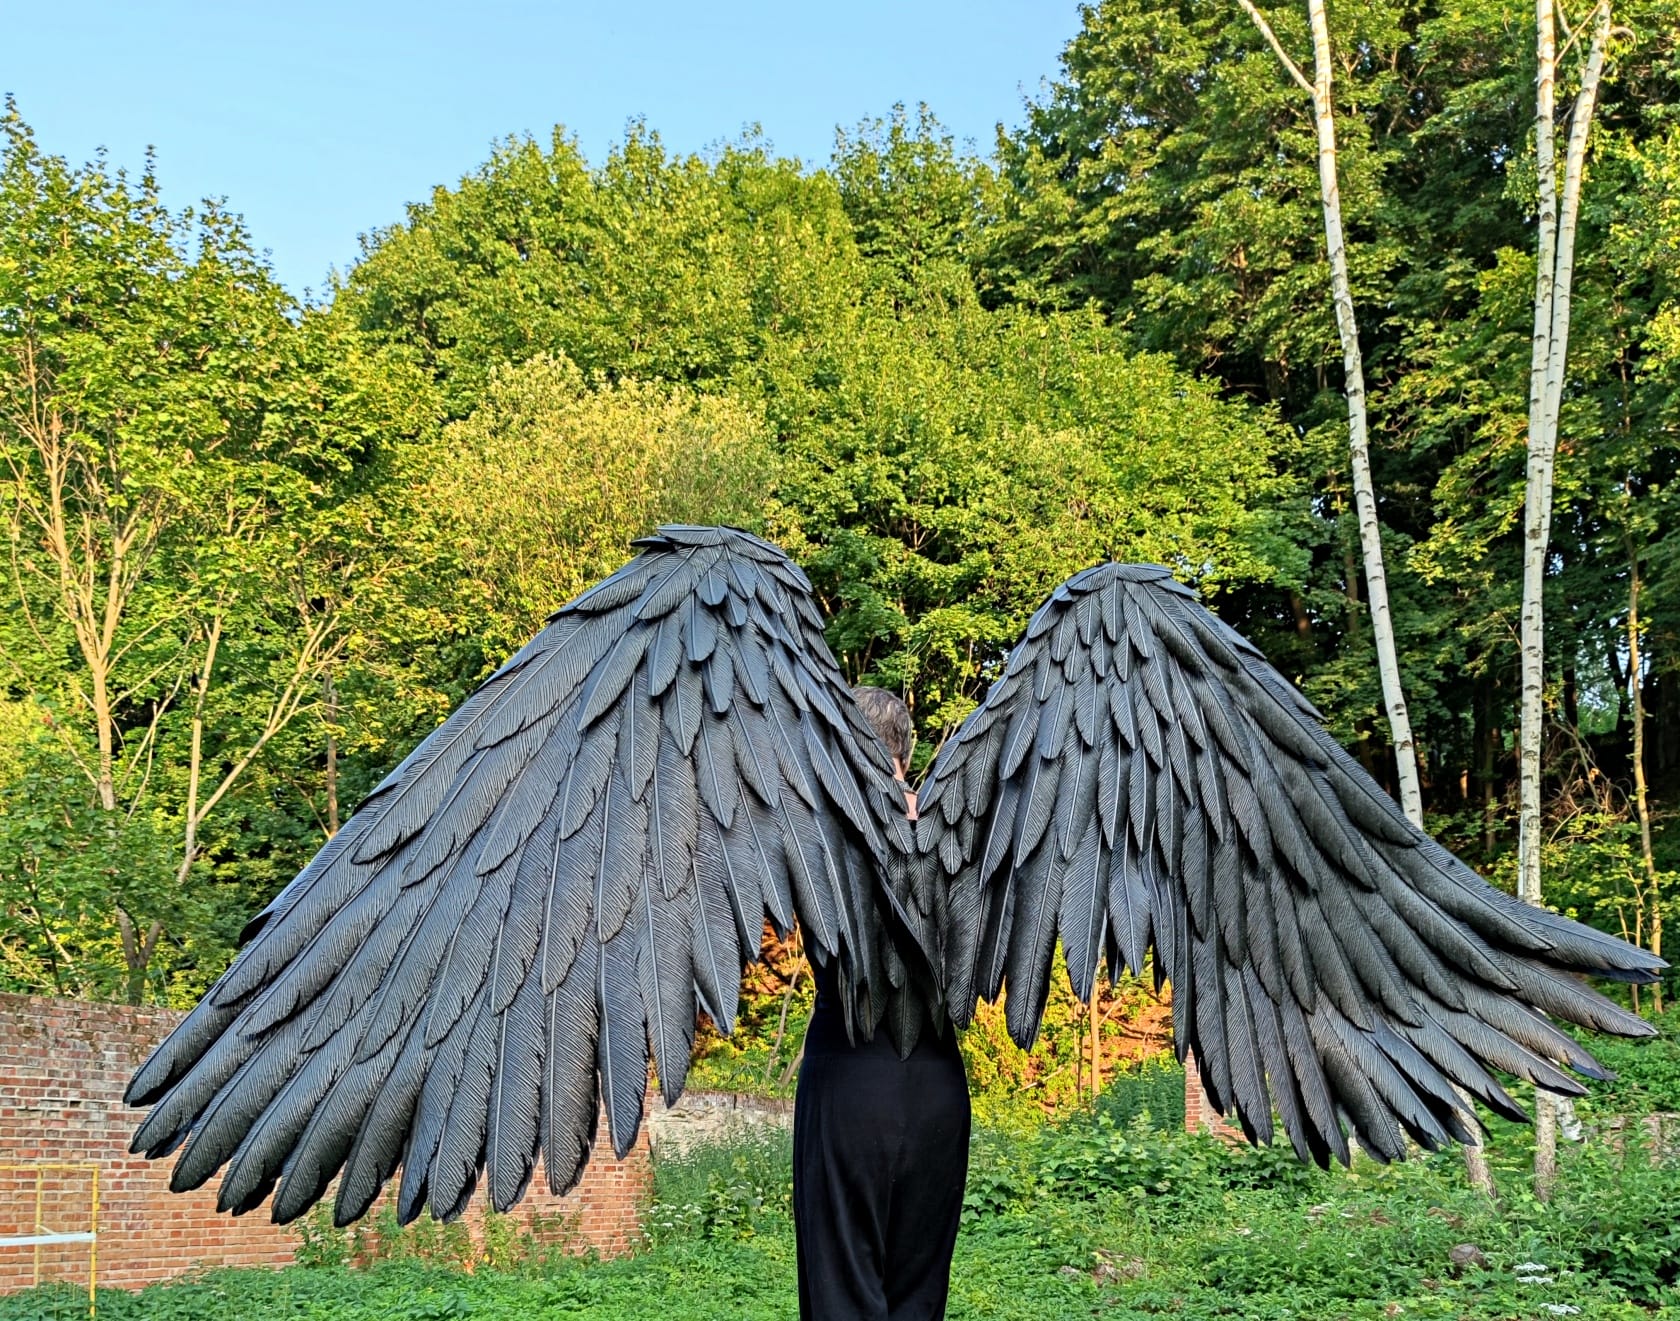 Large movable Red wings/Hawks from My Hero Academia Cosplay